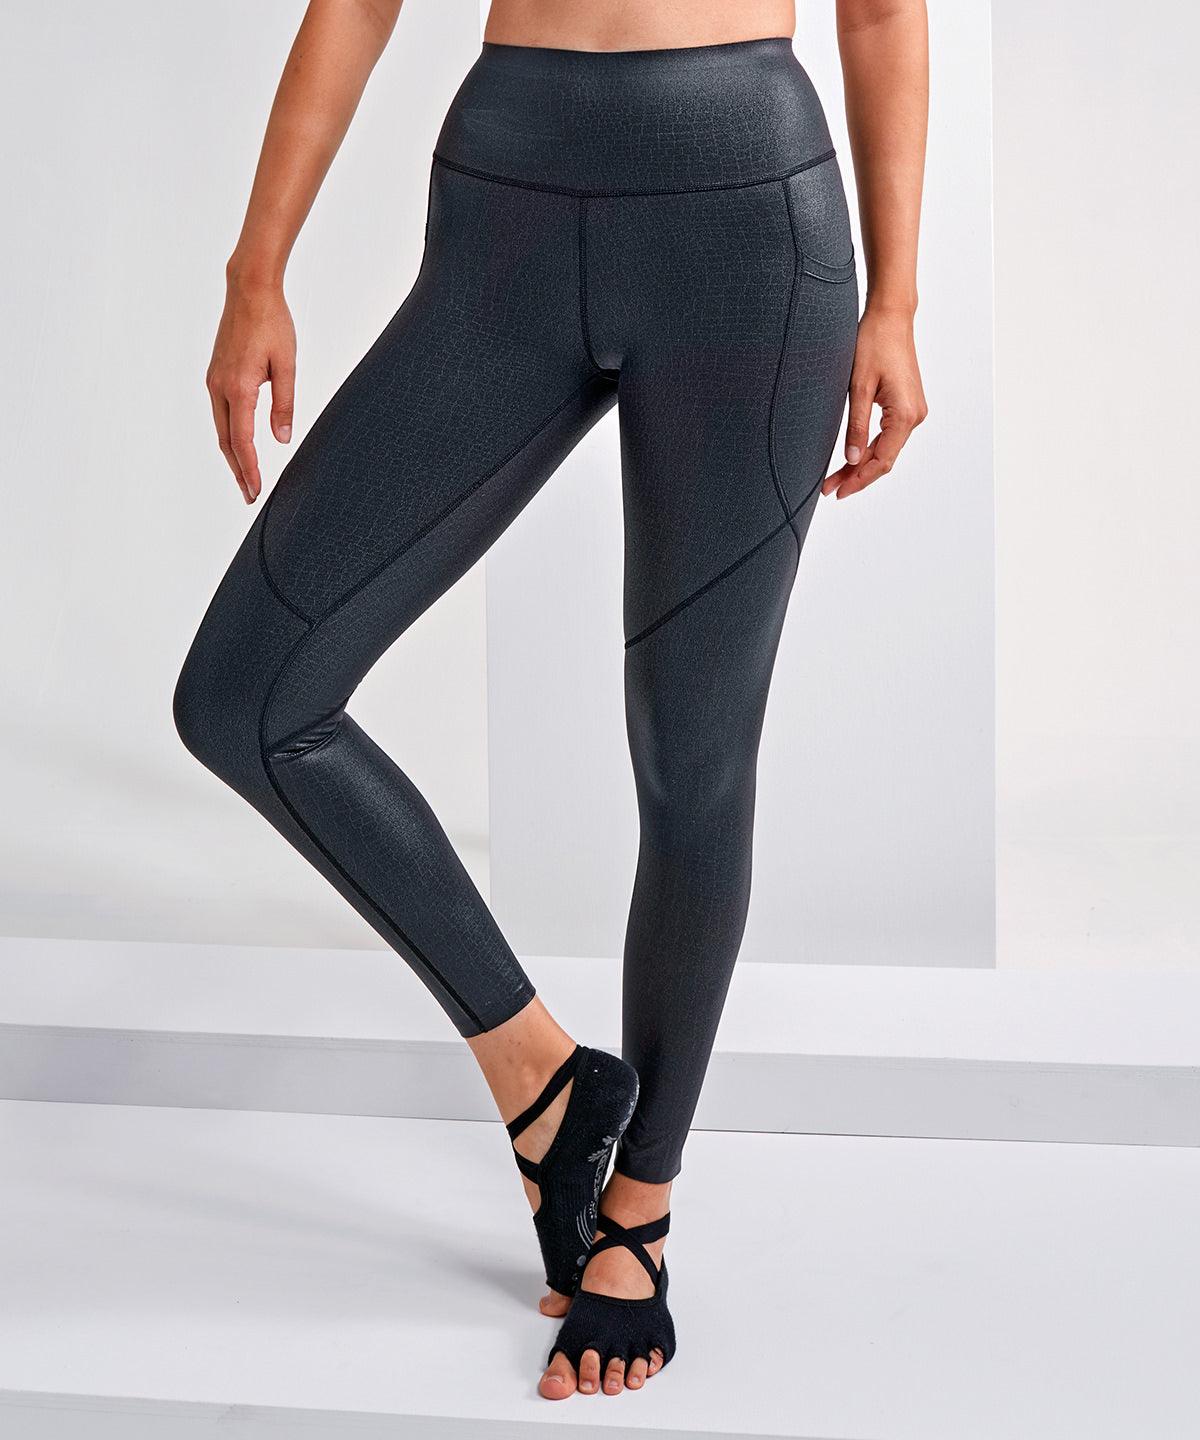 Black - Women's TriDri® embossed hourglass leggings Leggings TriDri® Everyday Essentials, Exclusives, Fashion Leggings, Leggings, New For 2021, New In Autumn Winter, New In Mid Year, Street Casual, Streetwear, Women's Fashion, Working From Home Schoolwear Centres